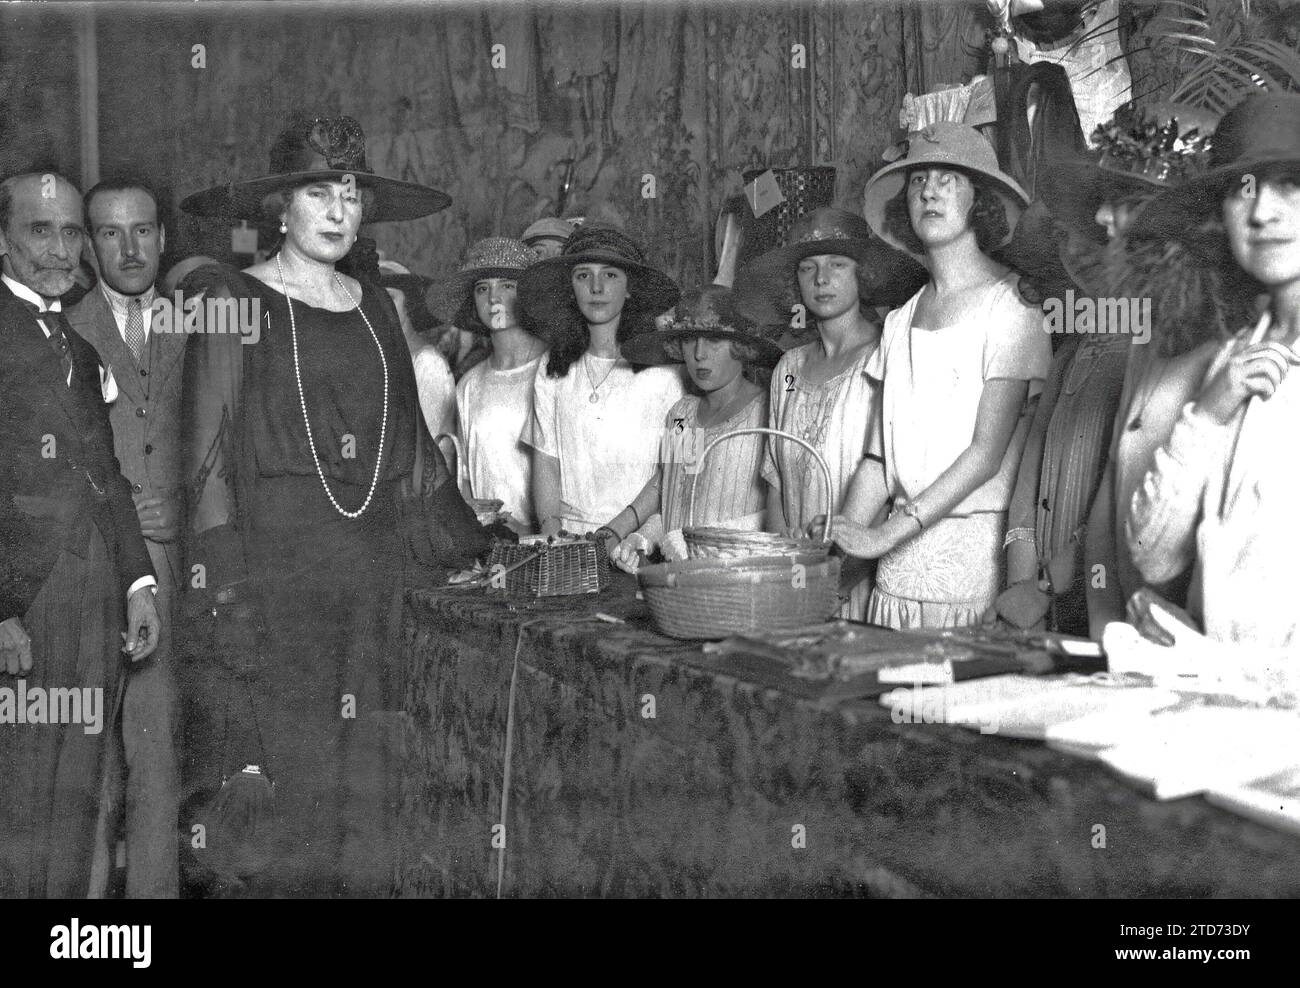 06/27/1922. Madrid. At the Red Cross Raffle. HM Queen Victoria (1) Buying Ballots for her August Daughters, the Infantitas Doña Beatriz (2) and Doña Cristina (3) at the inaugural party held yesterday. Credit: Album / Archivo ABC / Larregla Stock Photo